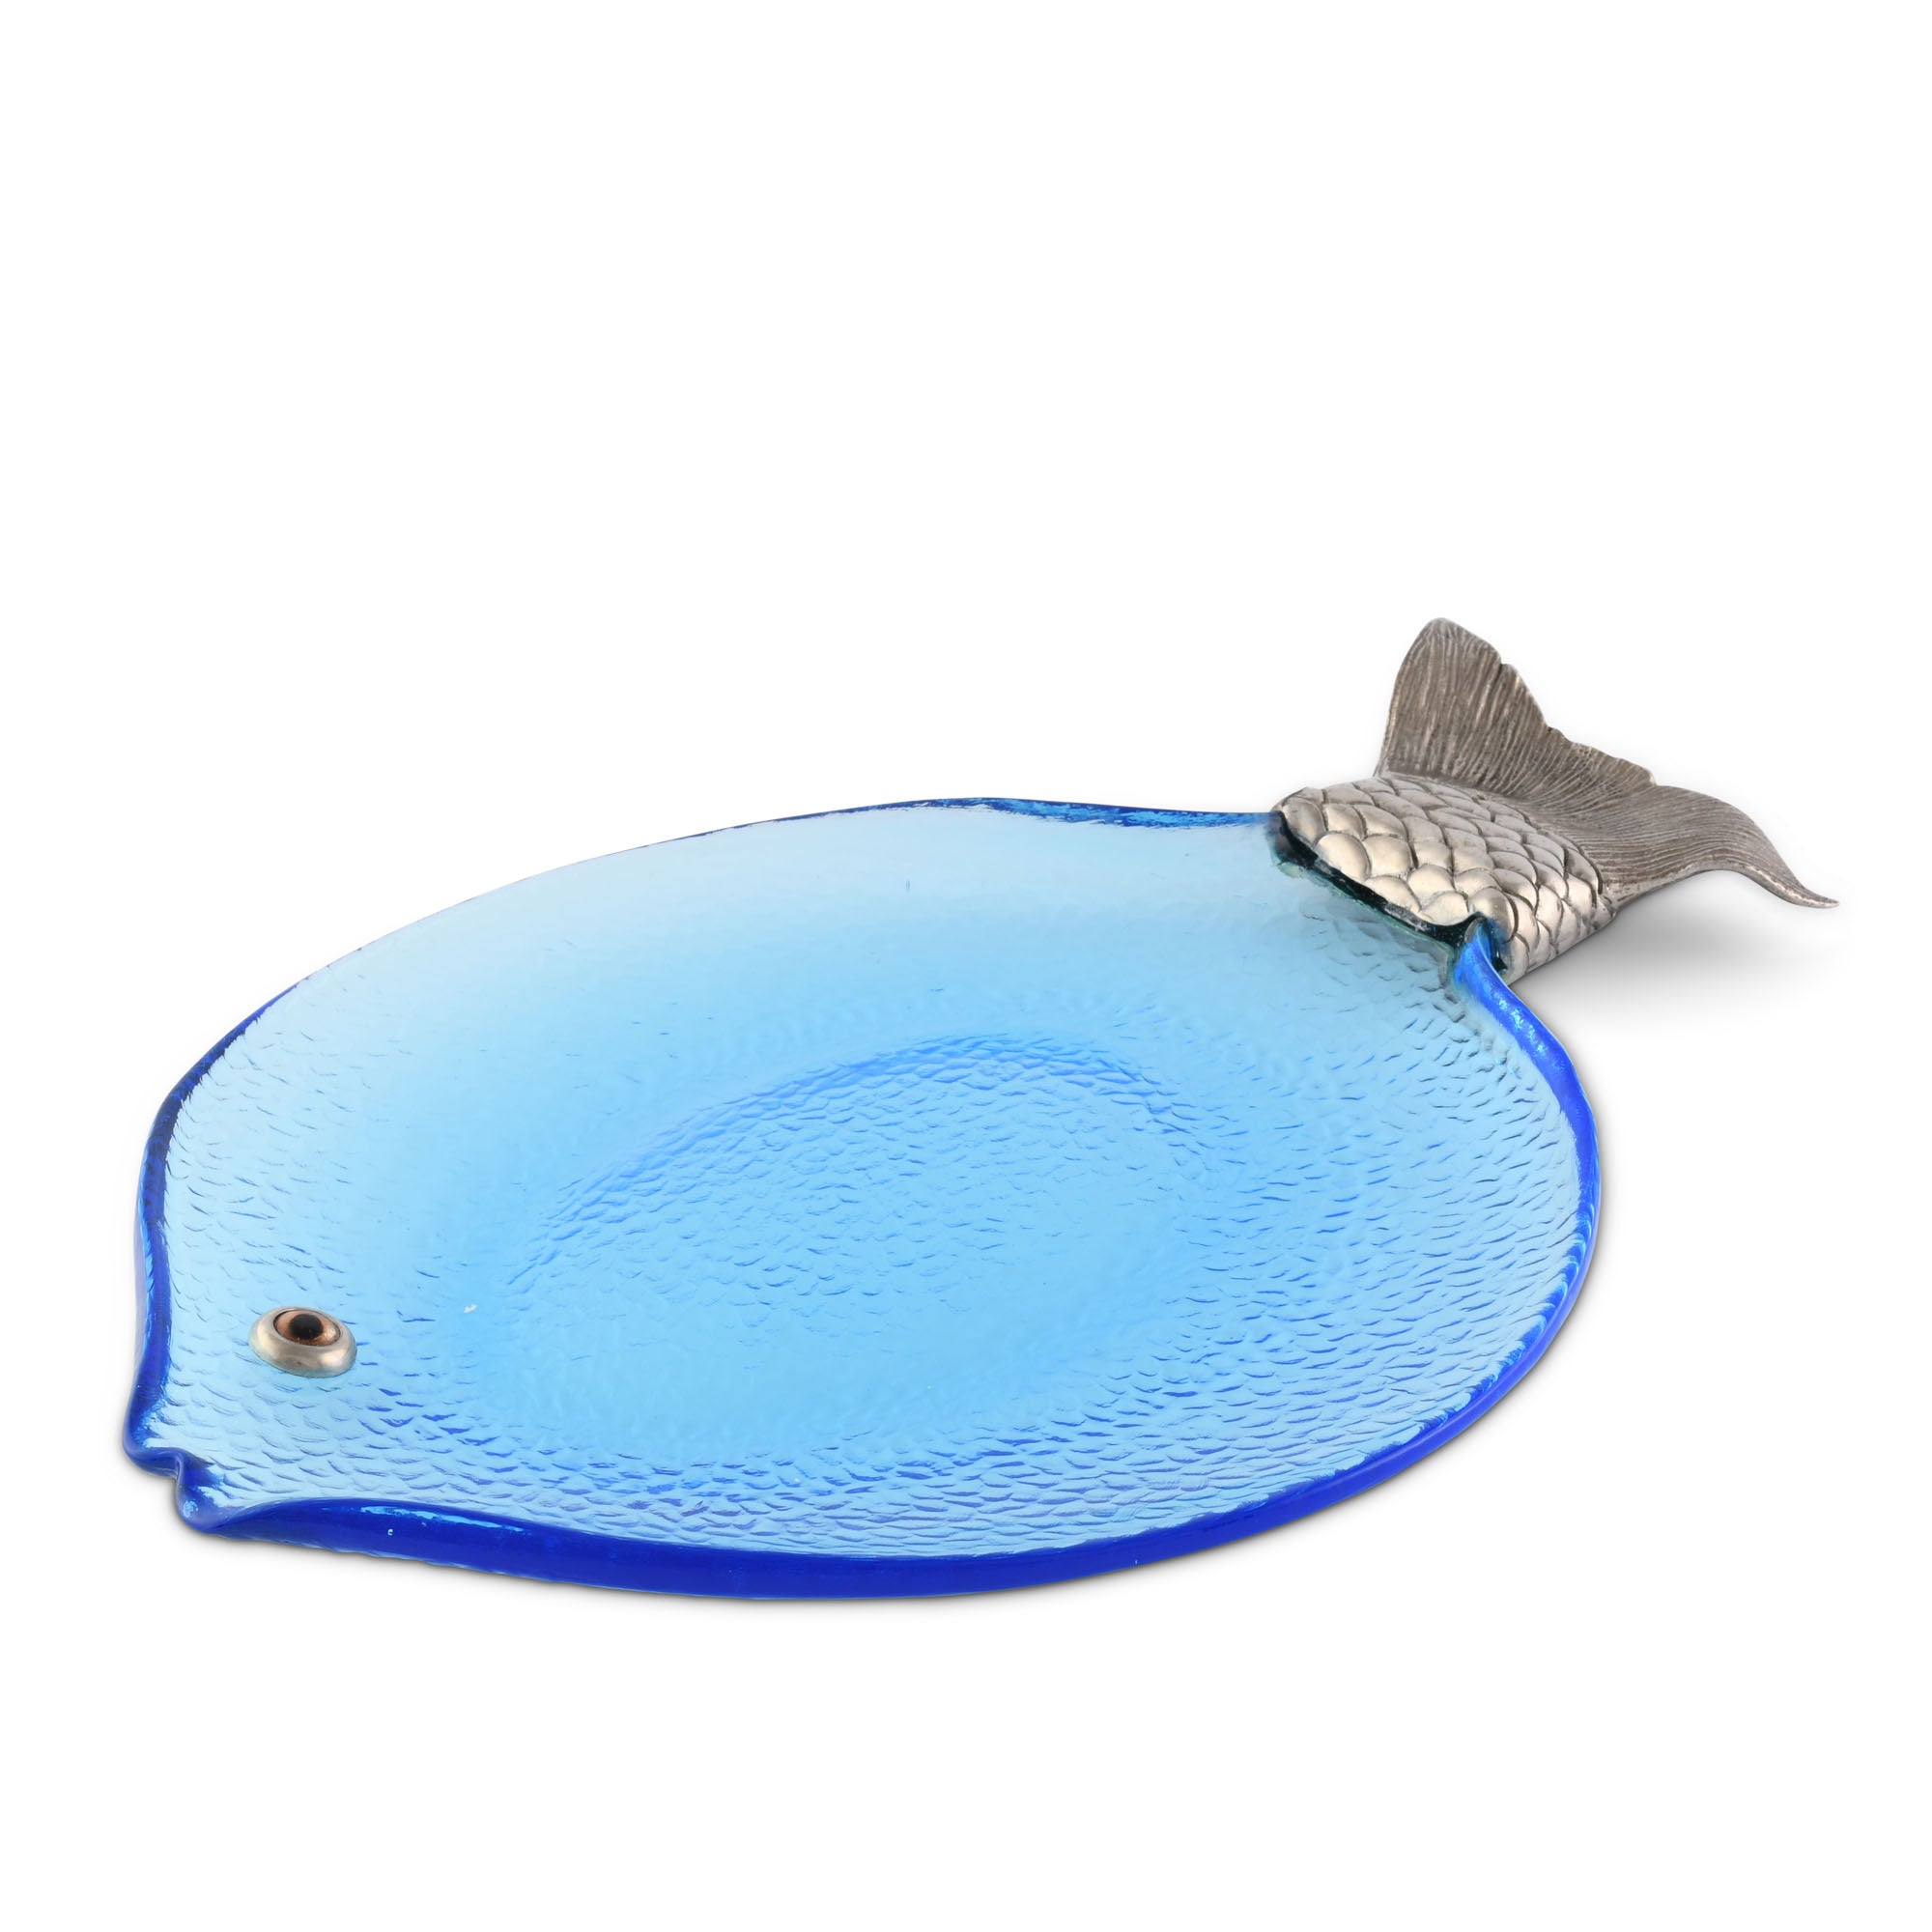 Vagabond House Ocean Fish Glass Tray Product Image